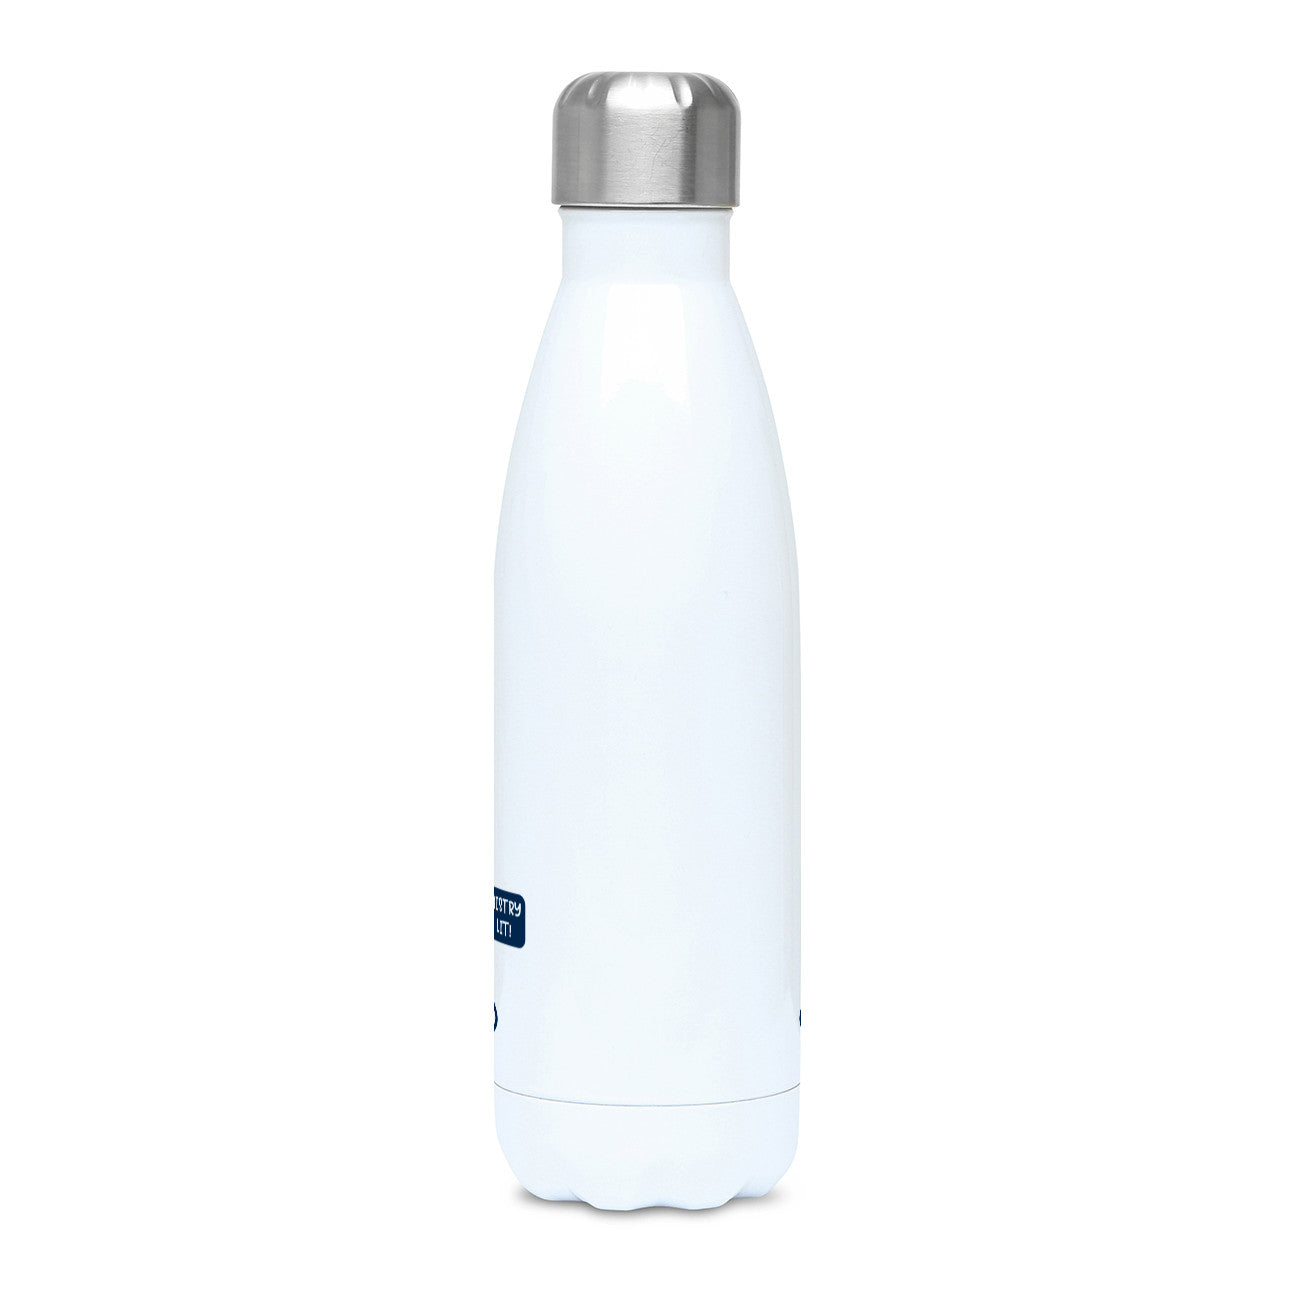 A tall white stainless steel drink bottle with a brushed silver lid and wavy shaped bottom, side view of the bottle with hardly any of the design showing. The lid of the bottle is on.